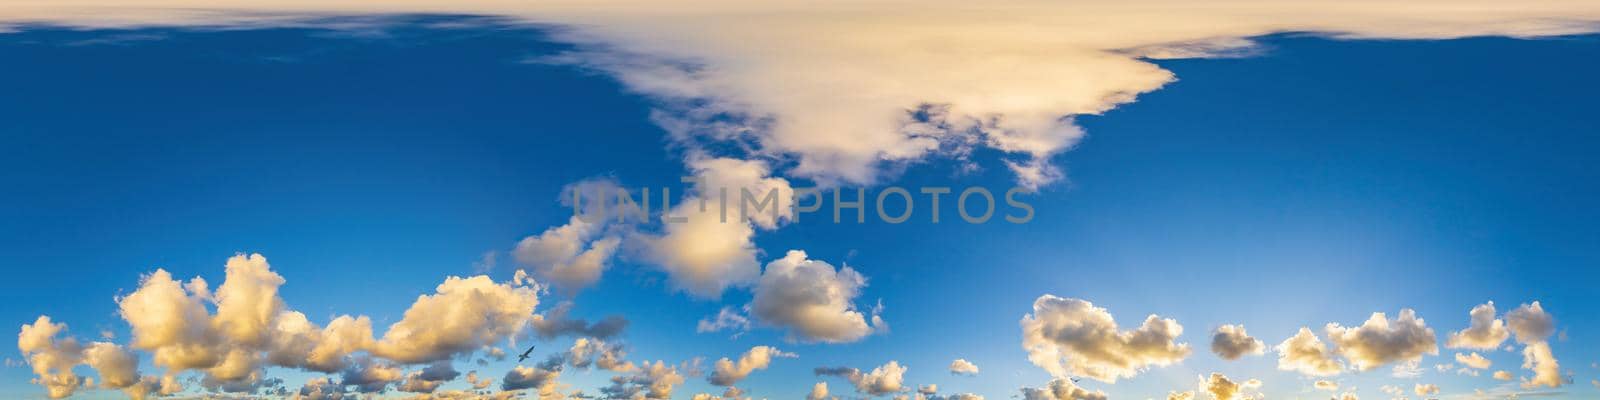 Sky panorama with Cirrus clouds in Seamless spherical equirectangular format. Full zenith for use in 3D graphics, game and editing aerial drone 360 degree panoramas for sky replacement